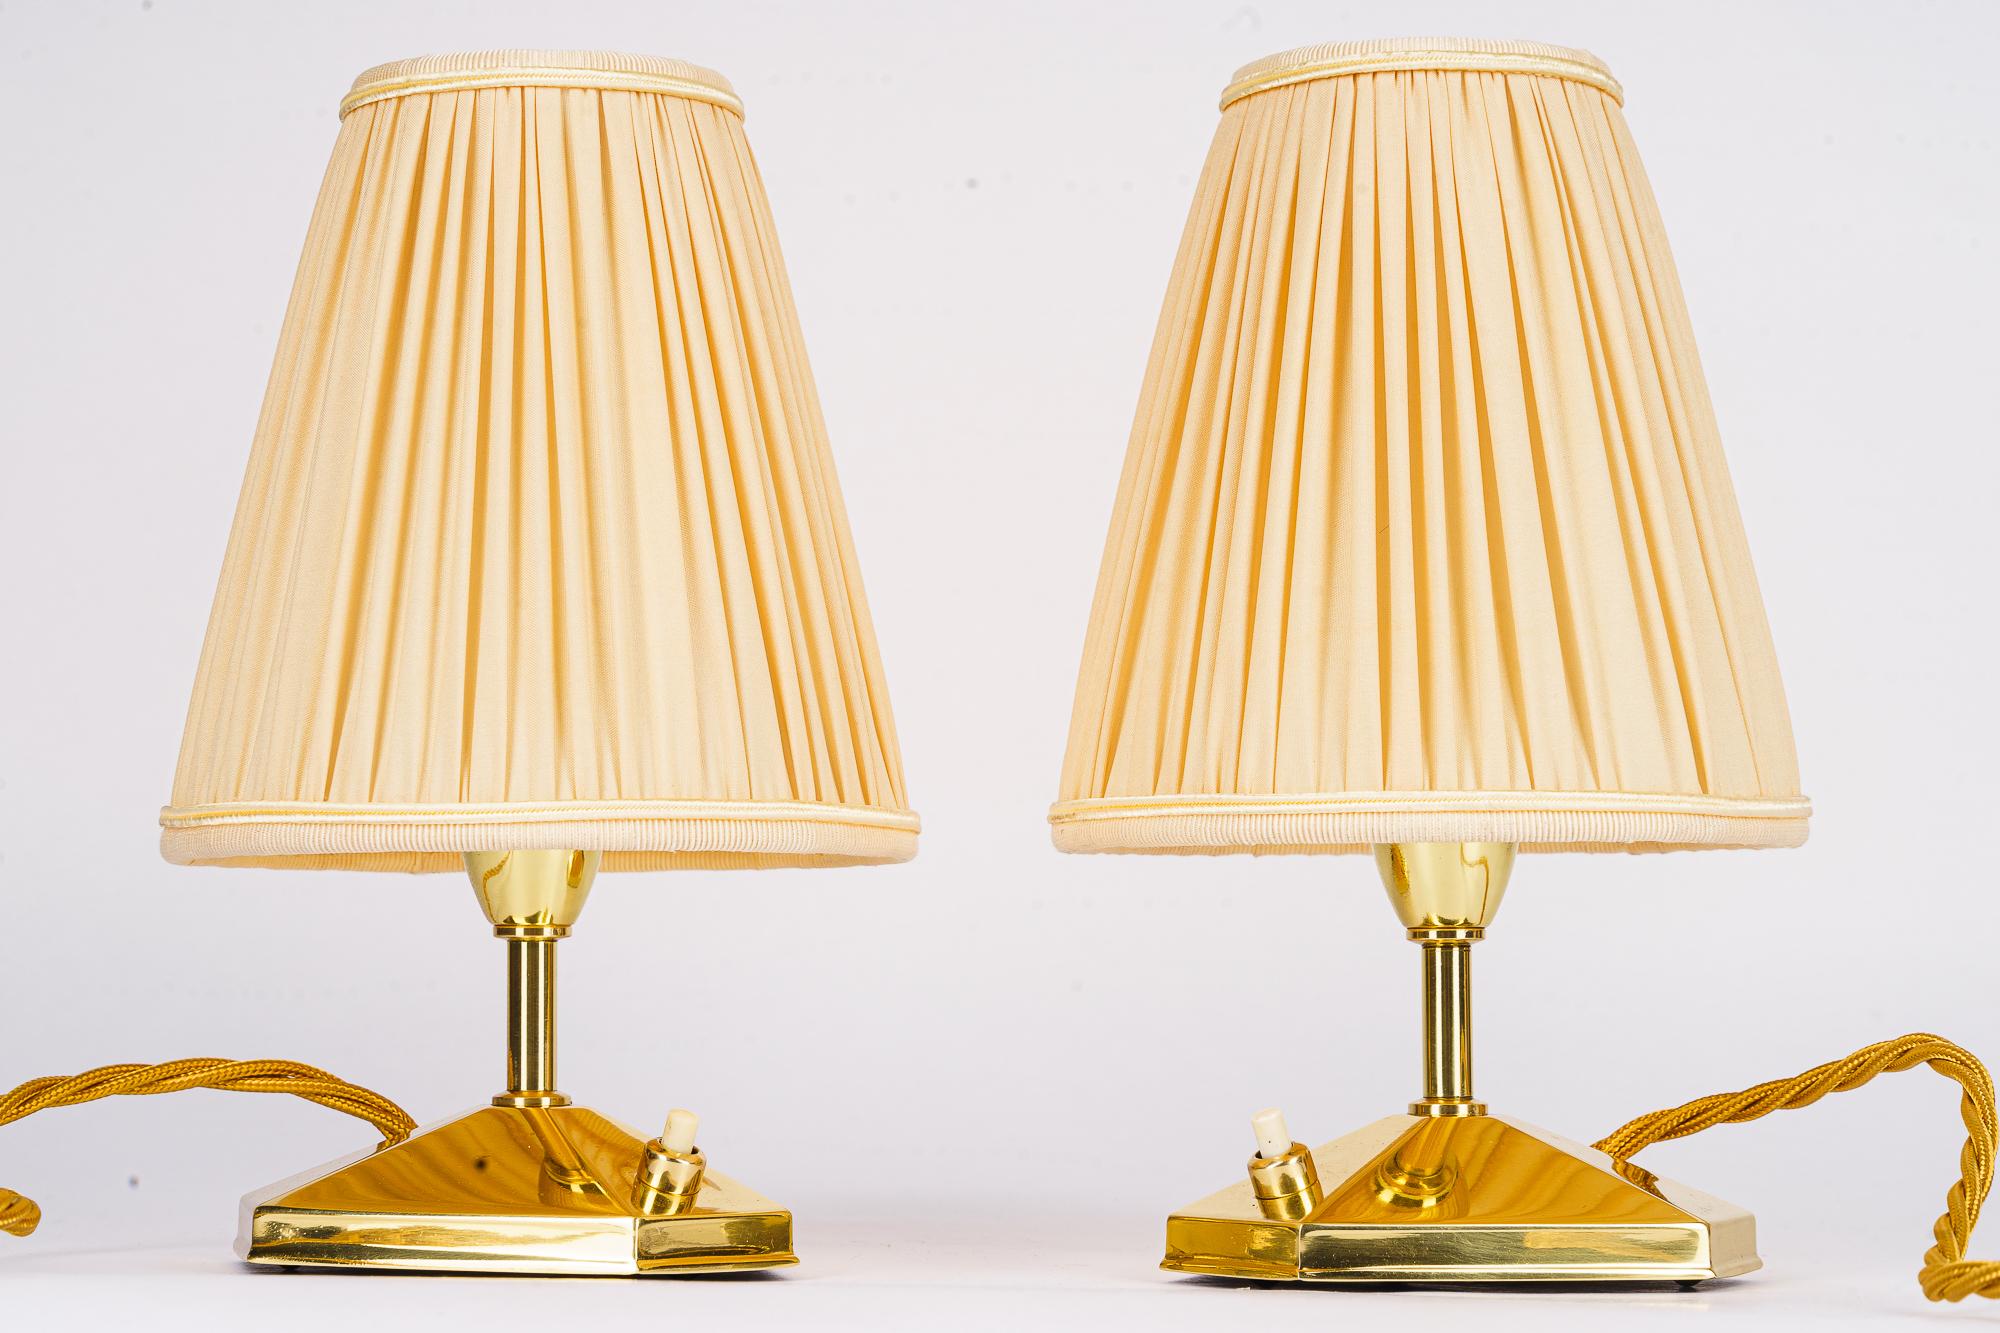 2 small brass table lamps with fabric shades vienna around 1960s
Brass polished and stove enameled
The fabric shade is replaced ( new )